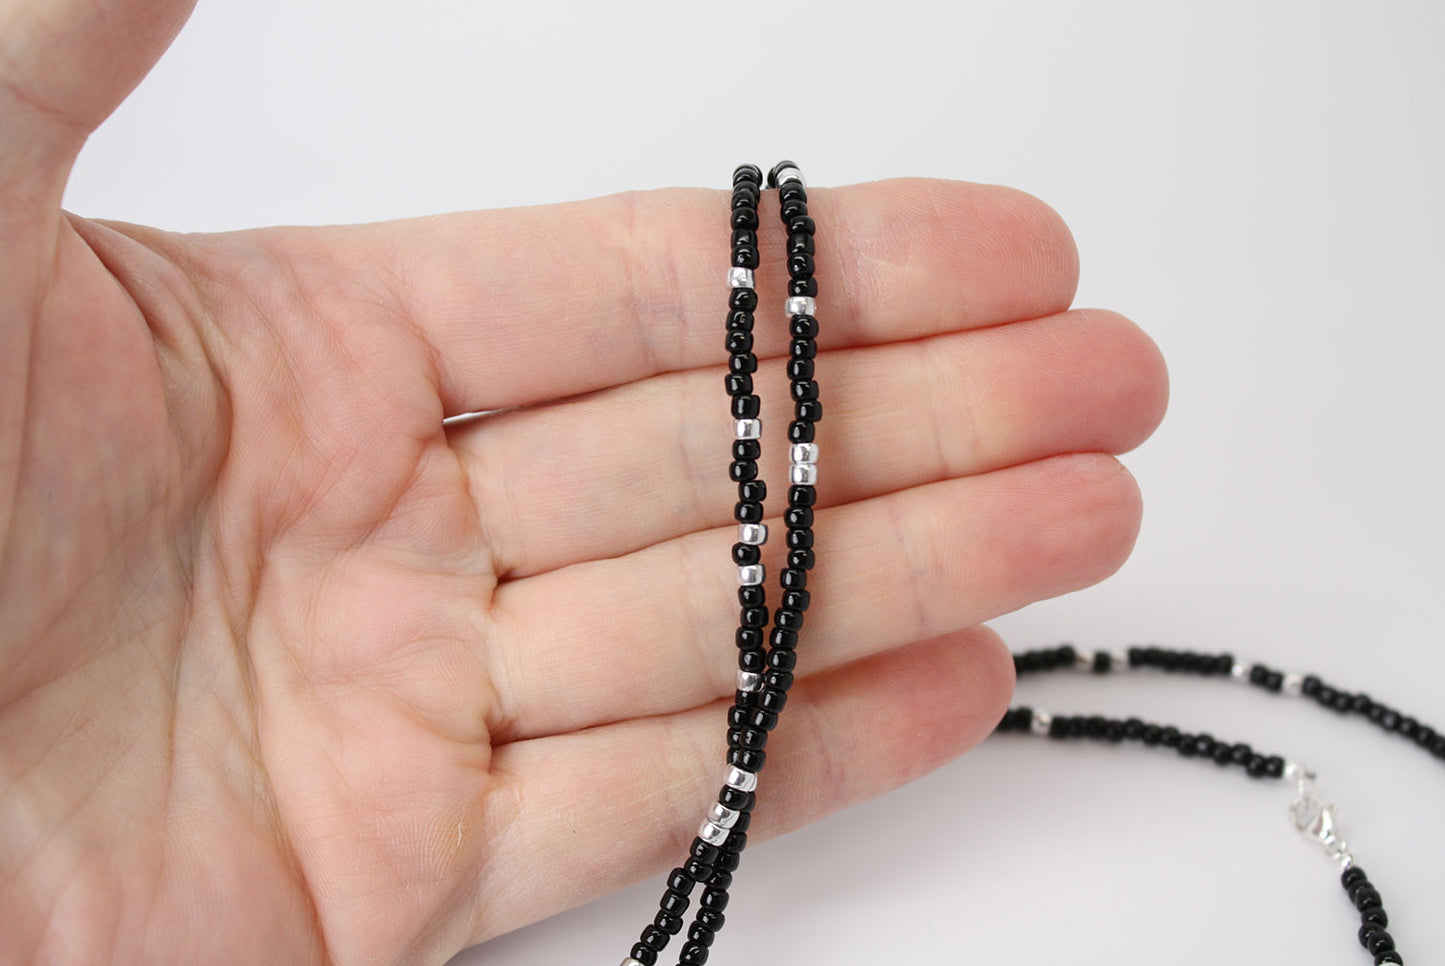 Black and Silver Seed Bead Necklace-Long-Single Strand-8/0 Beads